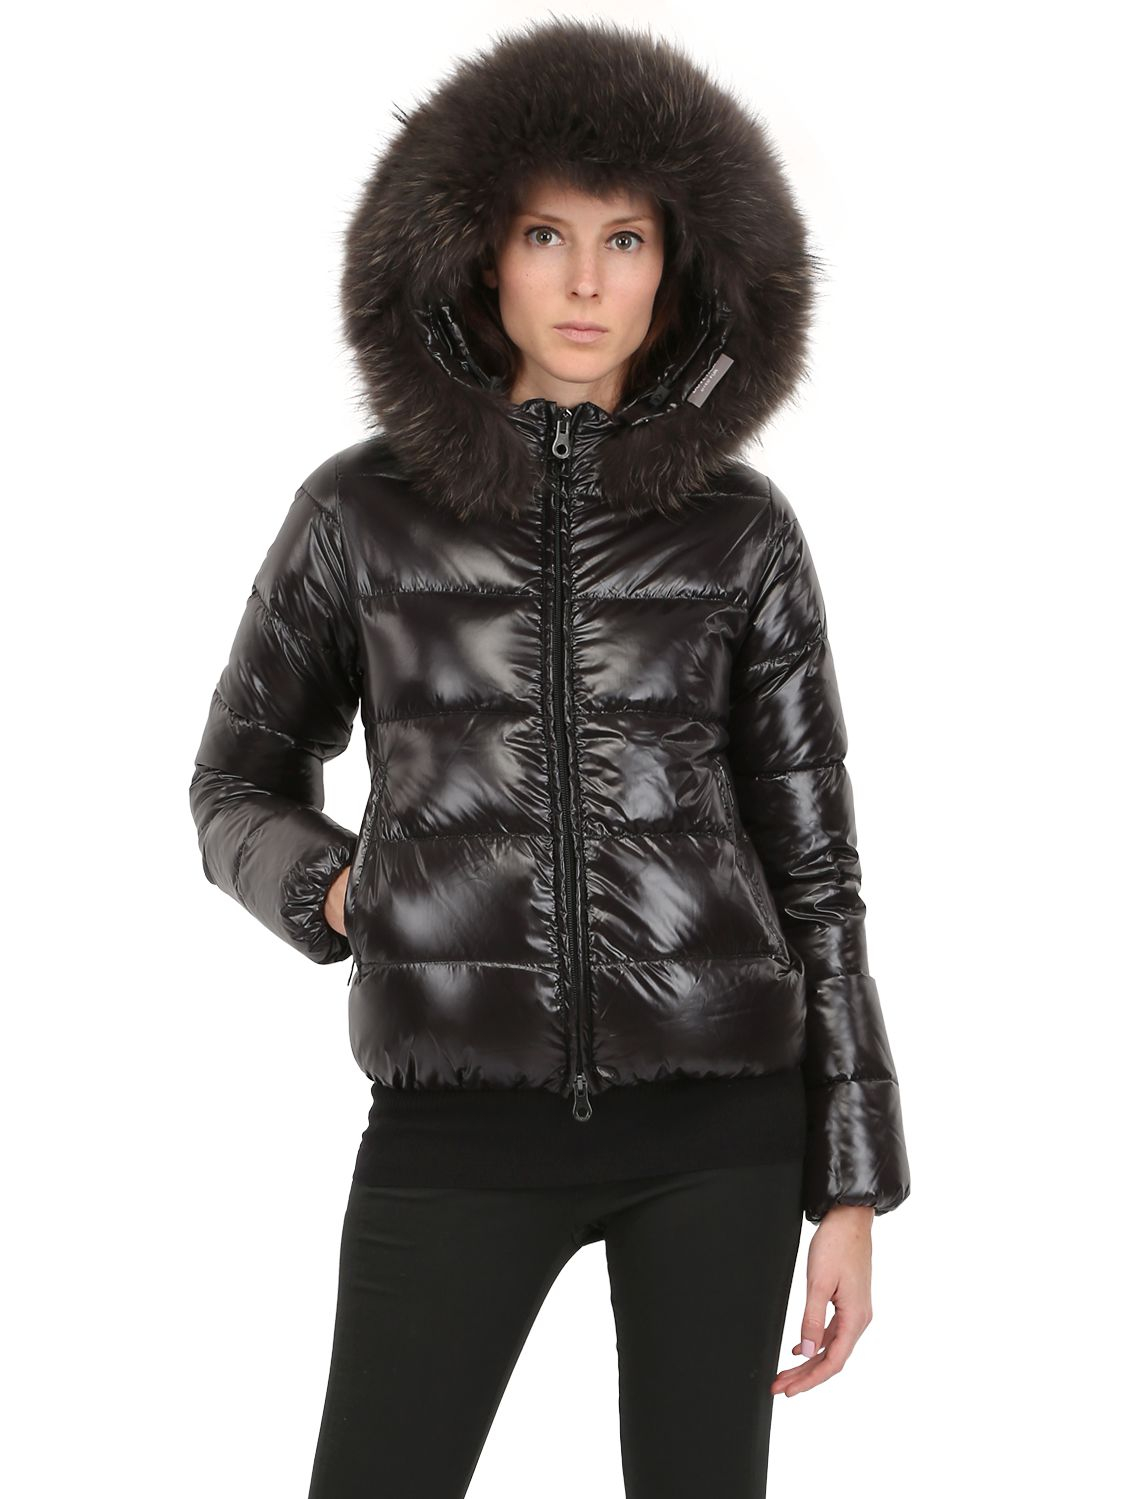 Lyst - Duvetica Adhara Nylon Down Jacket with Fur in Black for Men